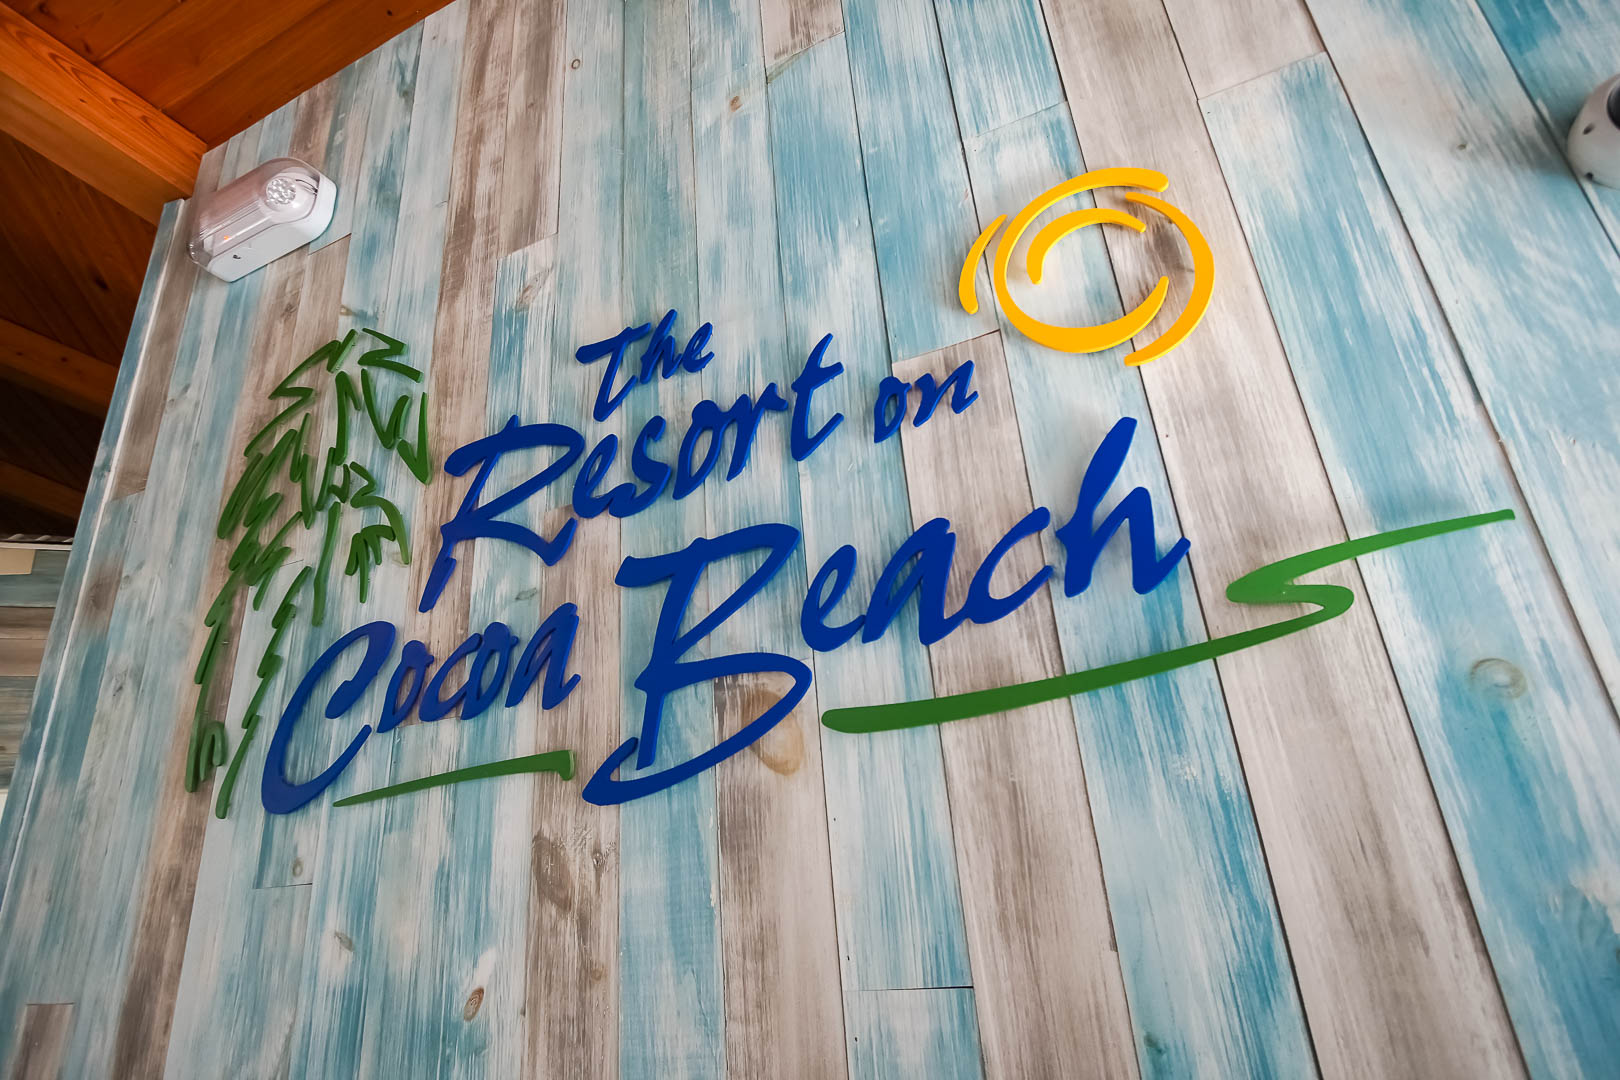 The colorful resort signage at VRI's The Resort on Cocoa Beach in Florida.